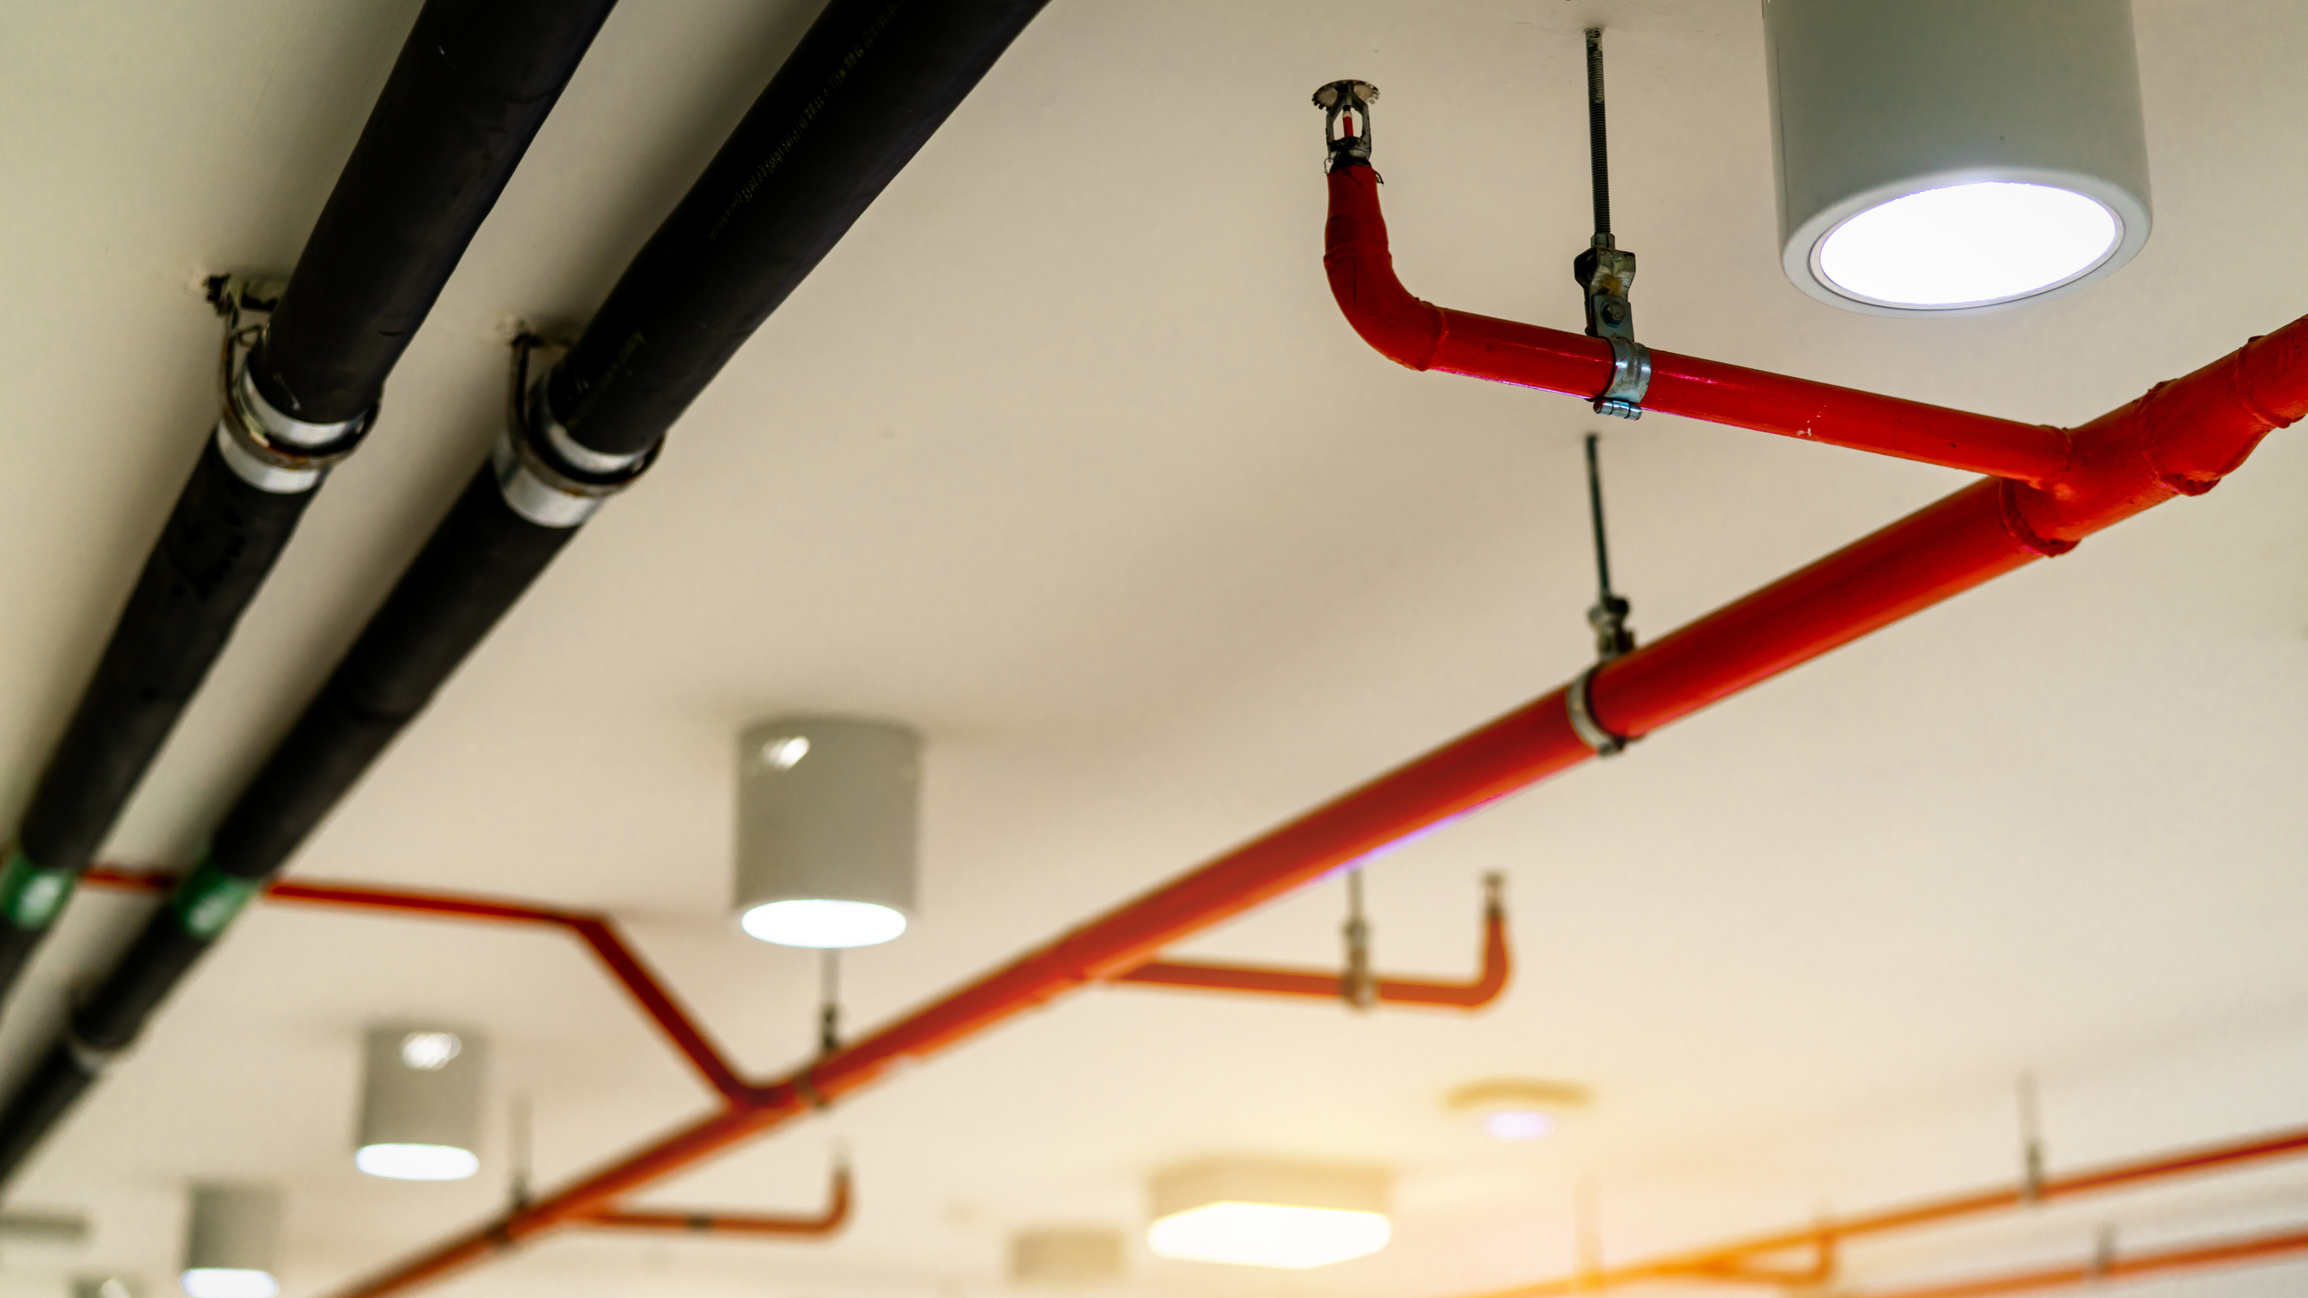 Fire sprinkler system with red pipes hanging from ceiling inside building.